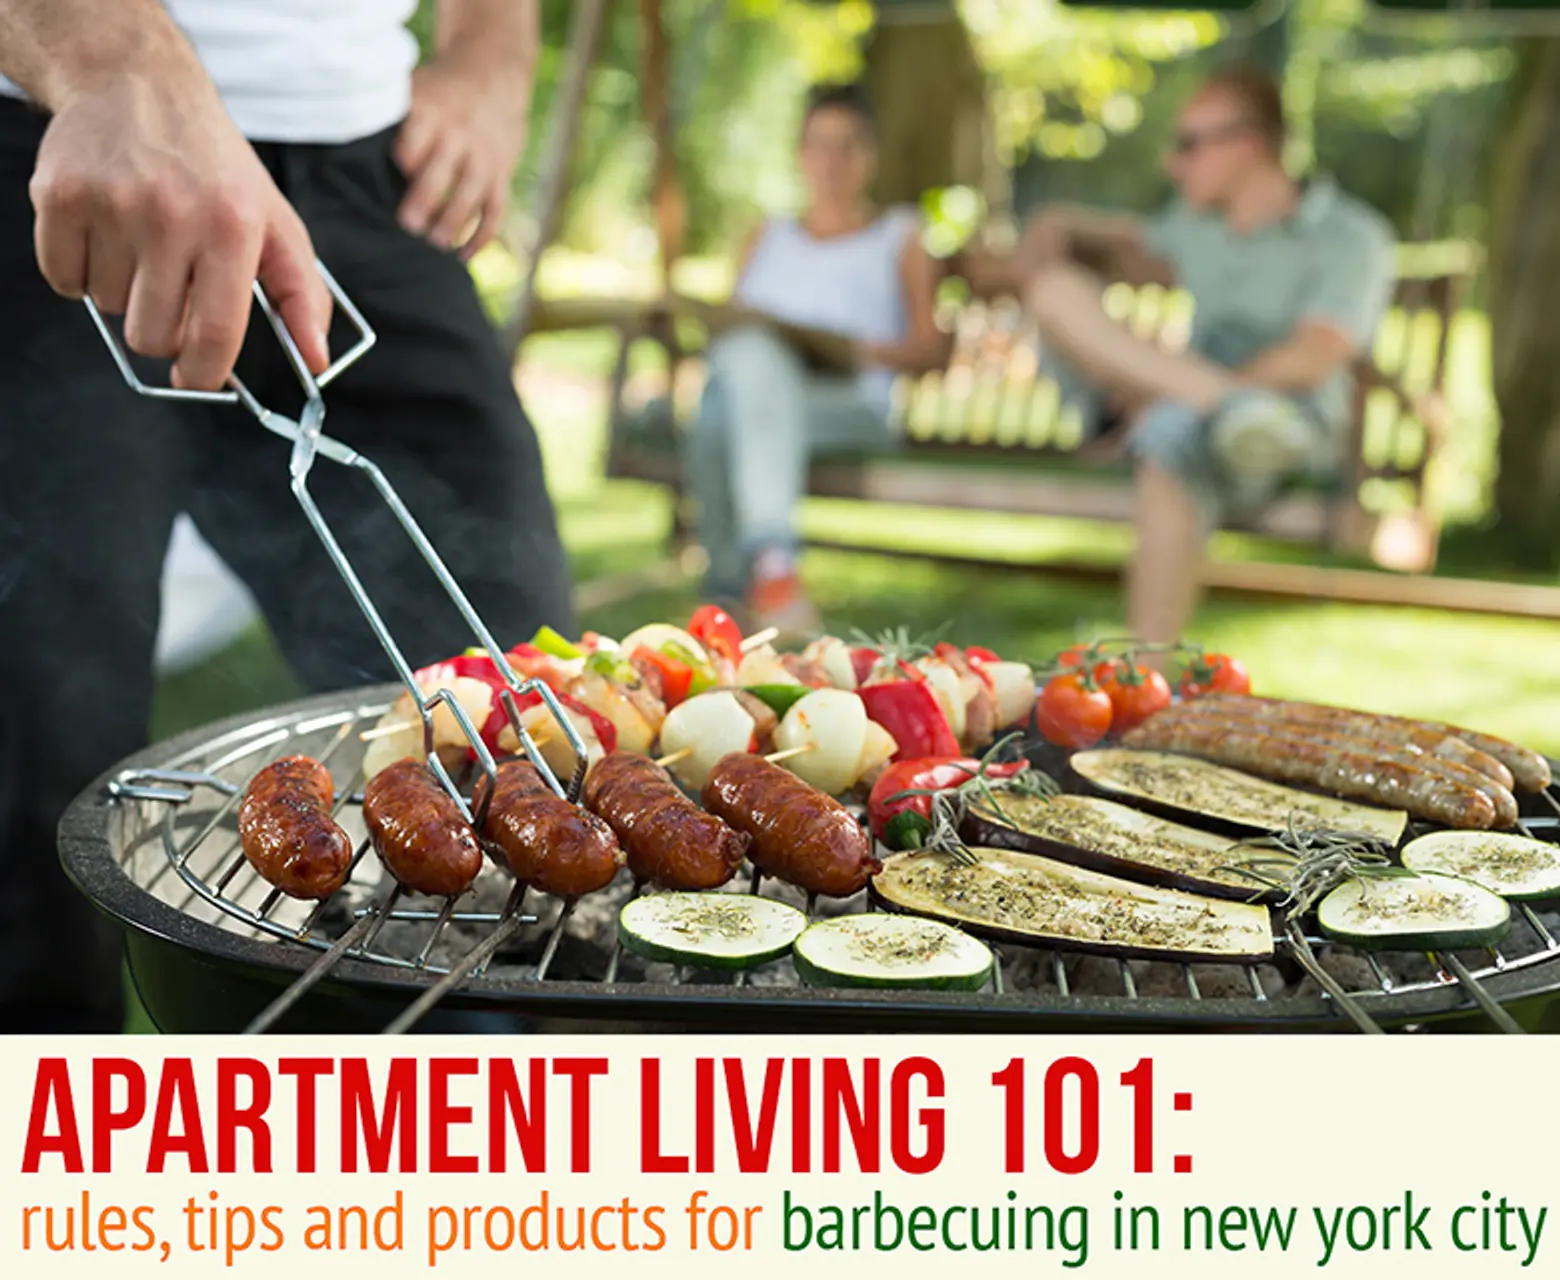 Get Your Grill On: Rules, Tips, and Products for Indoor and Outdoor Barbecuing in NYC